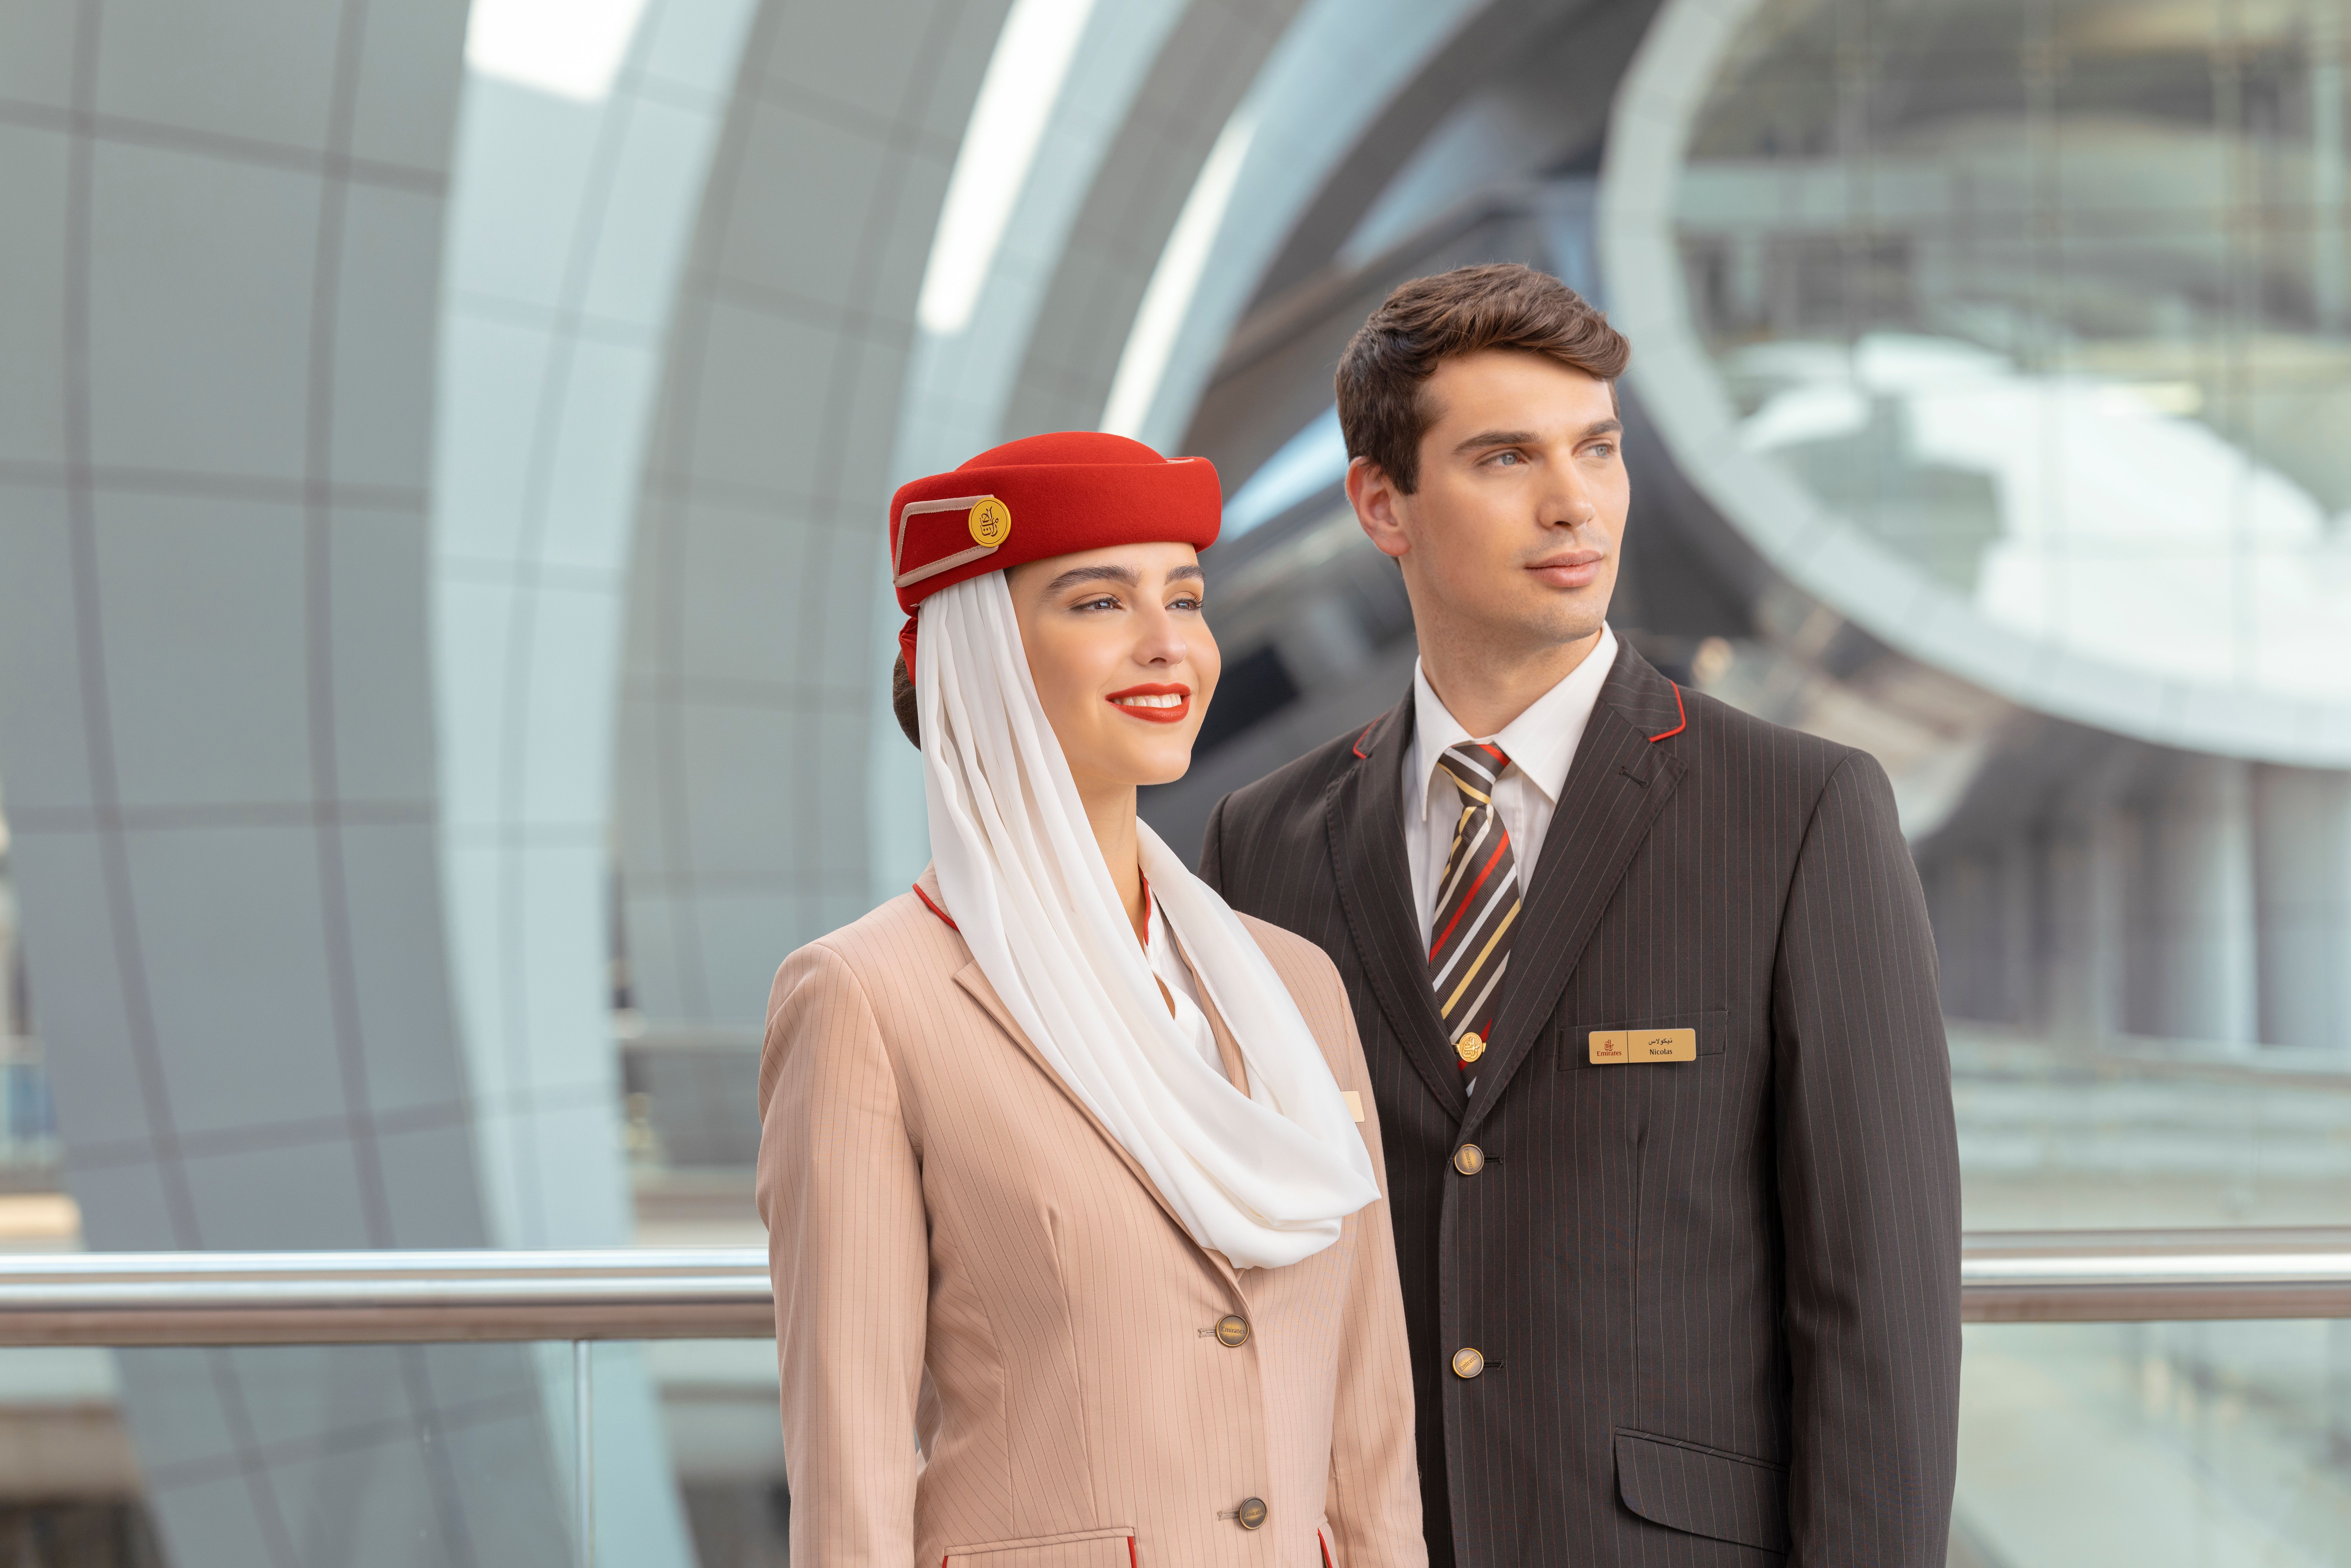 Male and female Emirates cabin crew members posing for a camera.